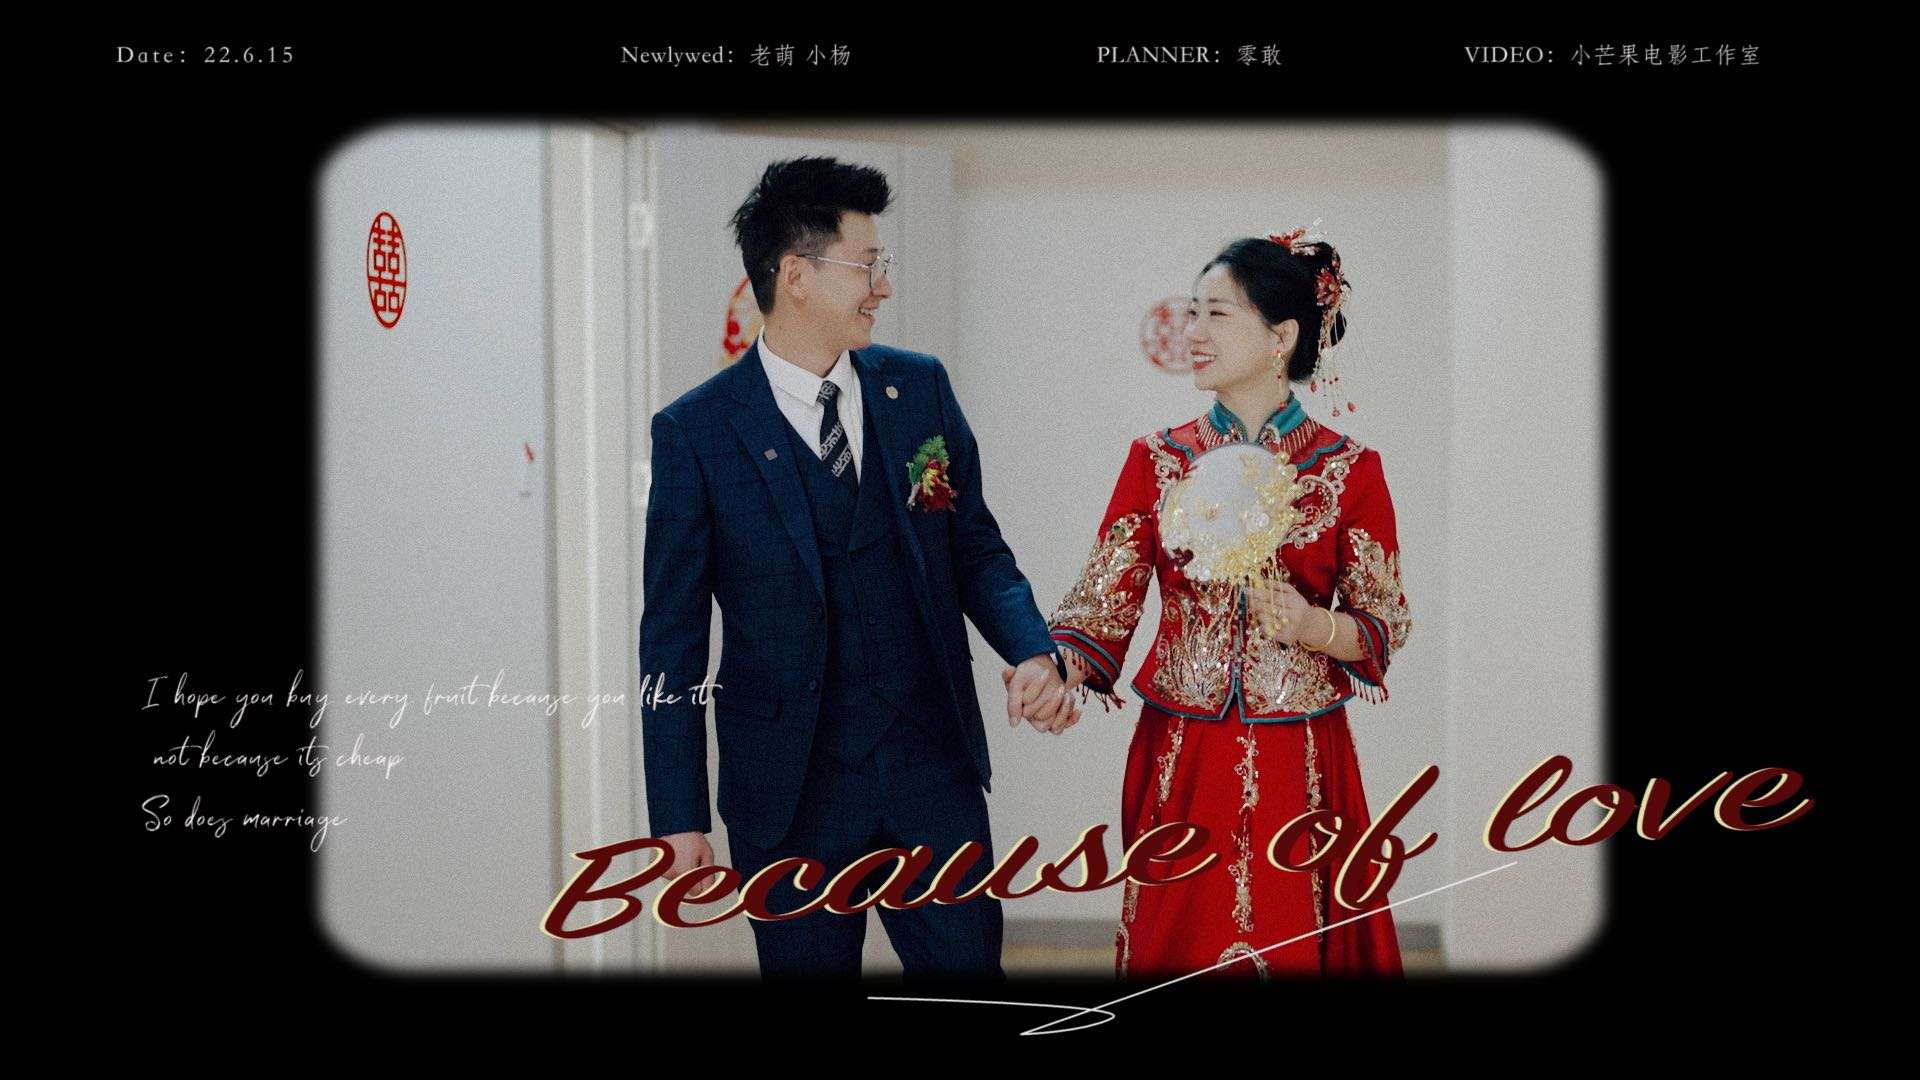 【Because of love】22.6.15婚礼作品